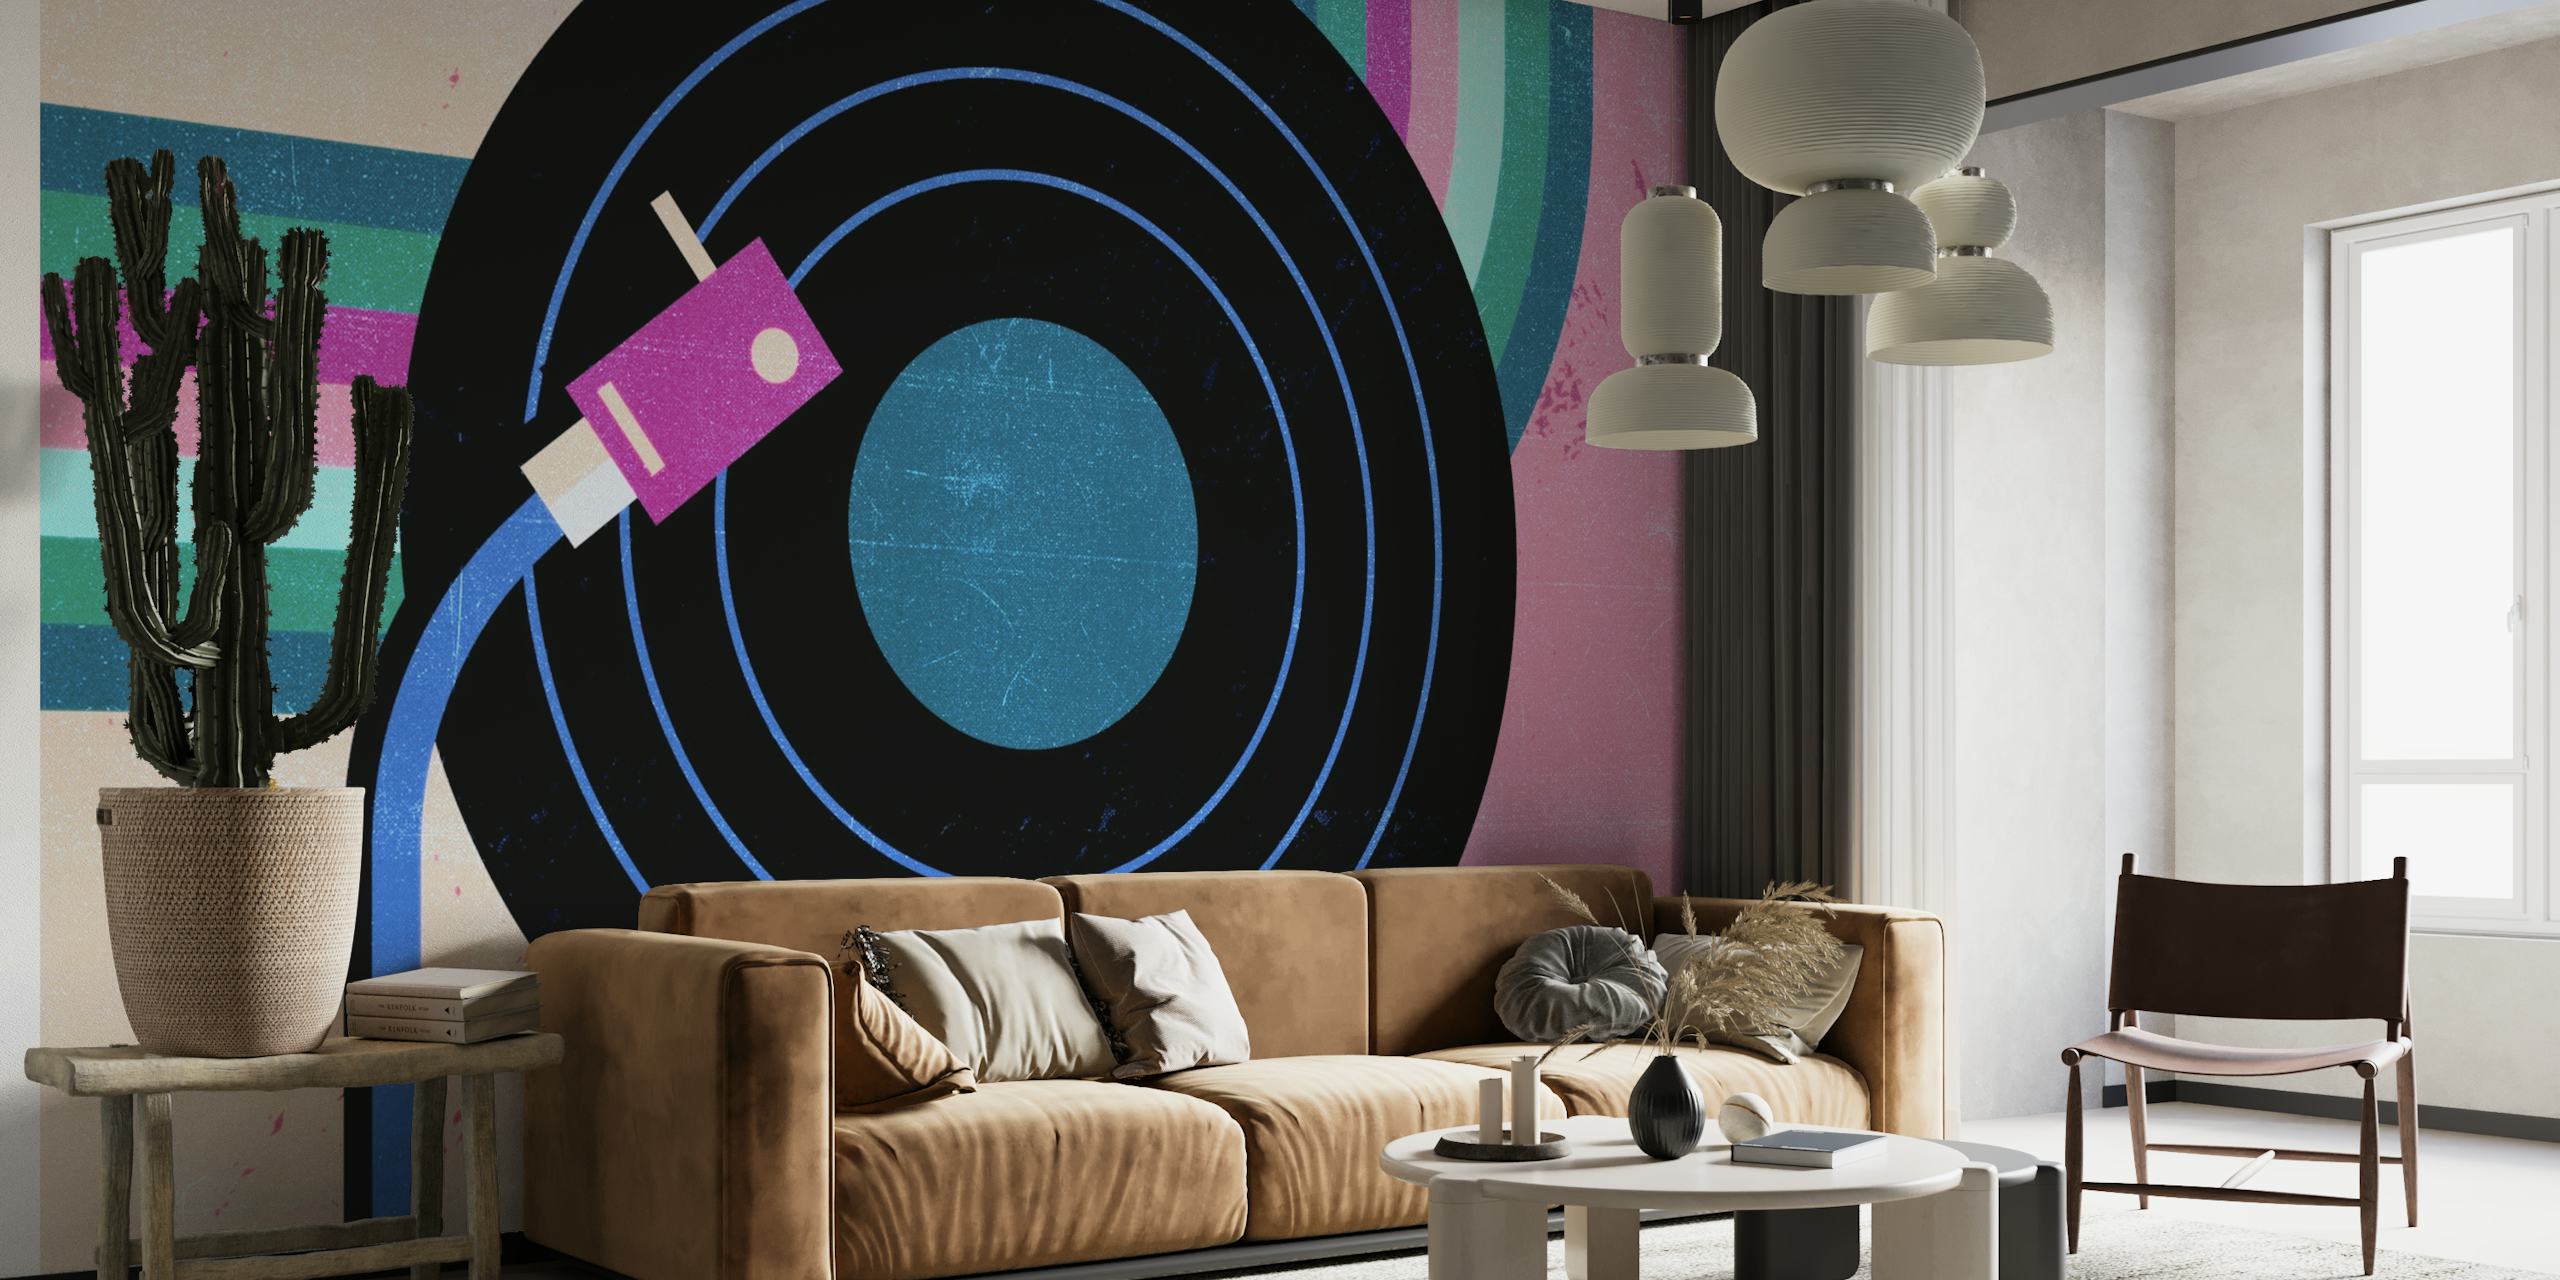 Retro vinyl record and turntable in pop art style wall mural